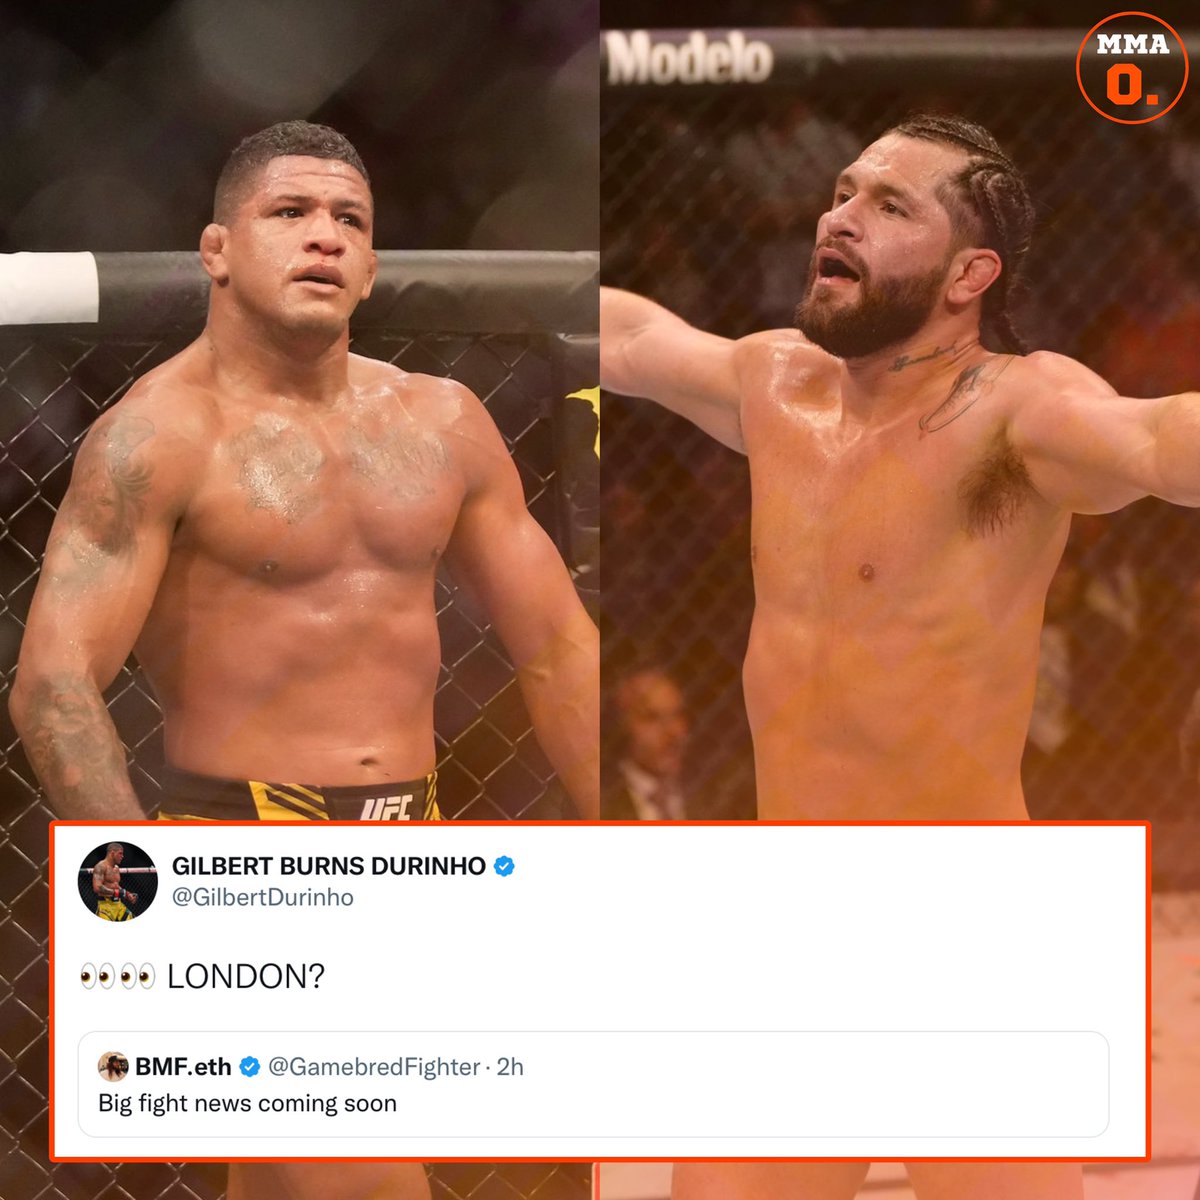 Is London about to get one last banger?🤔👀🔥
#UFC286 #UFC #MMA